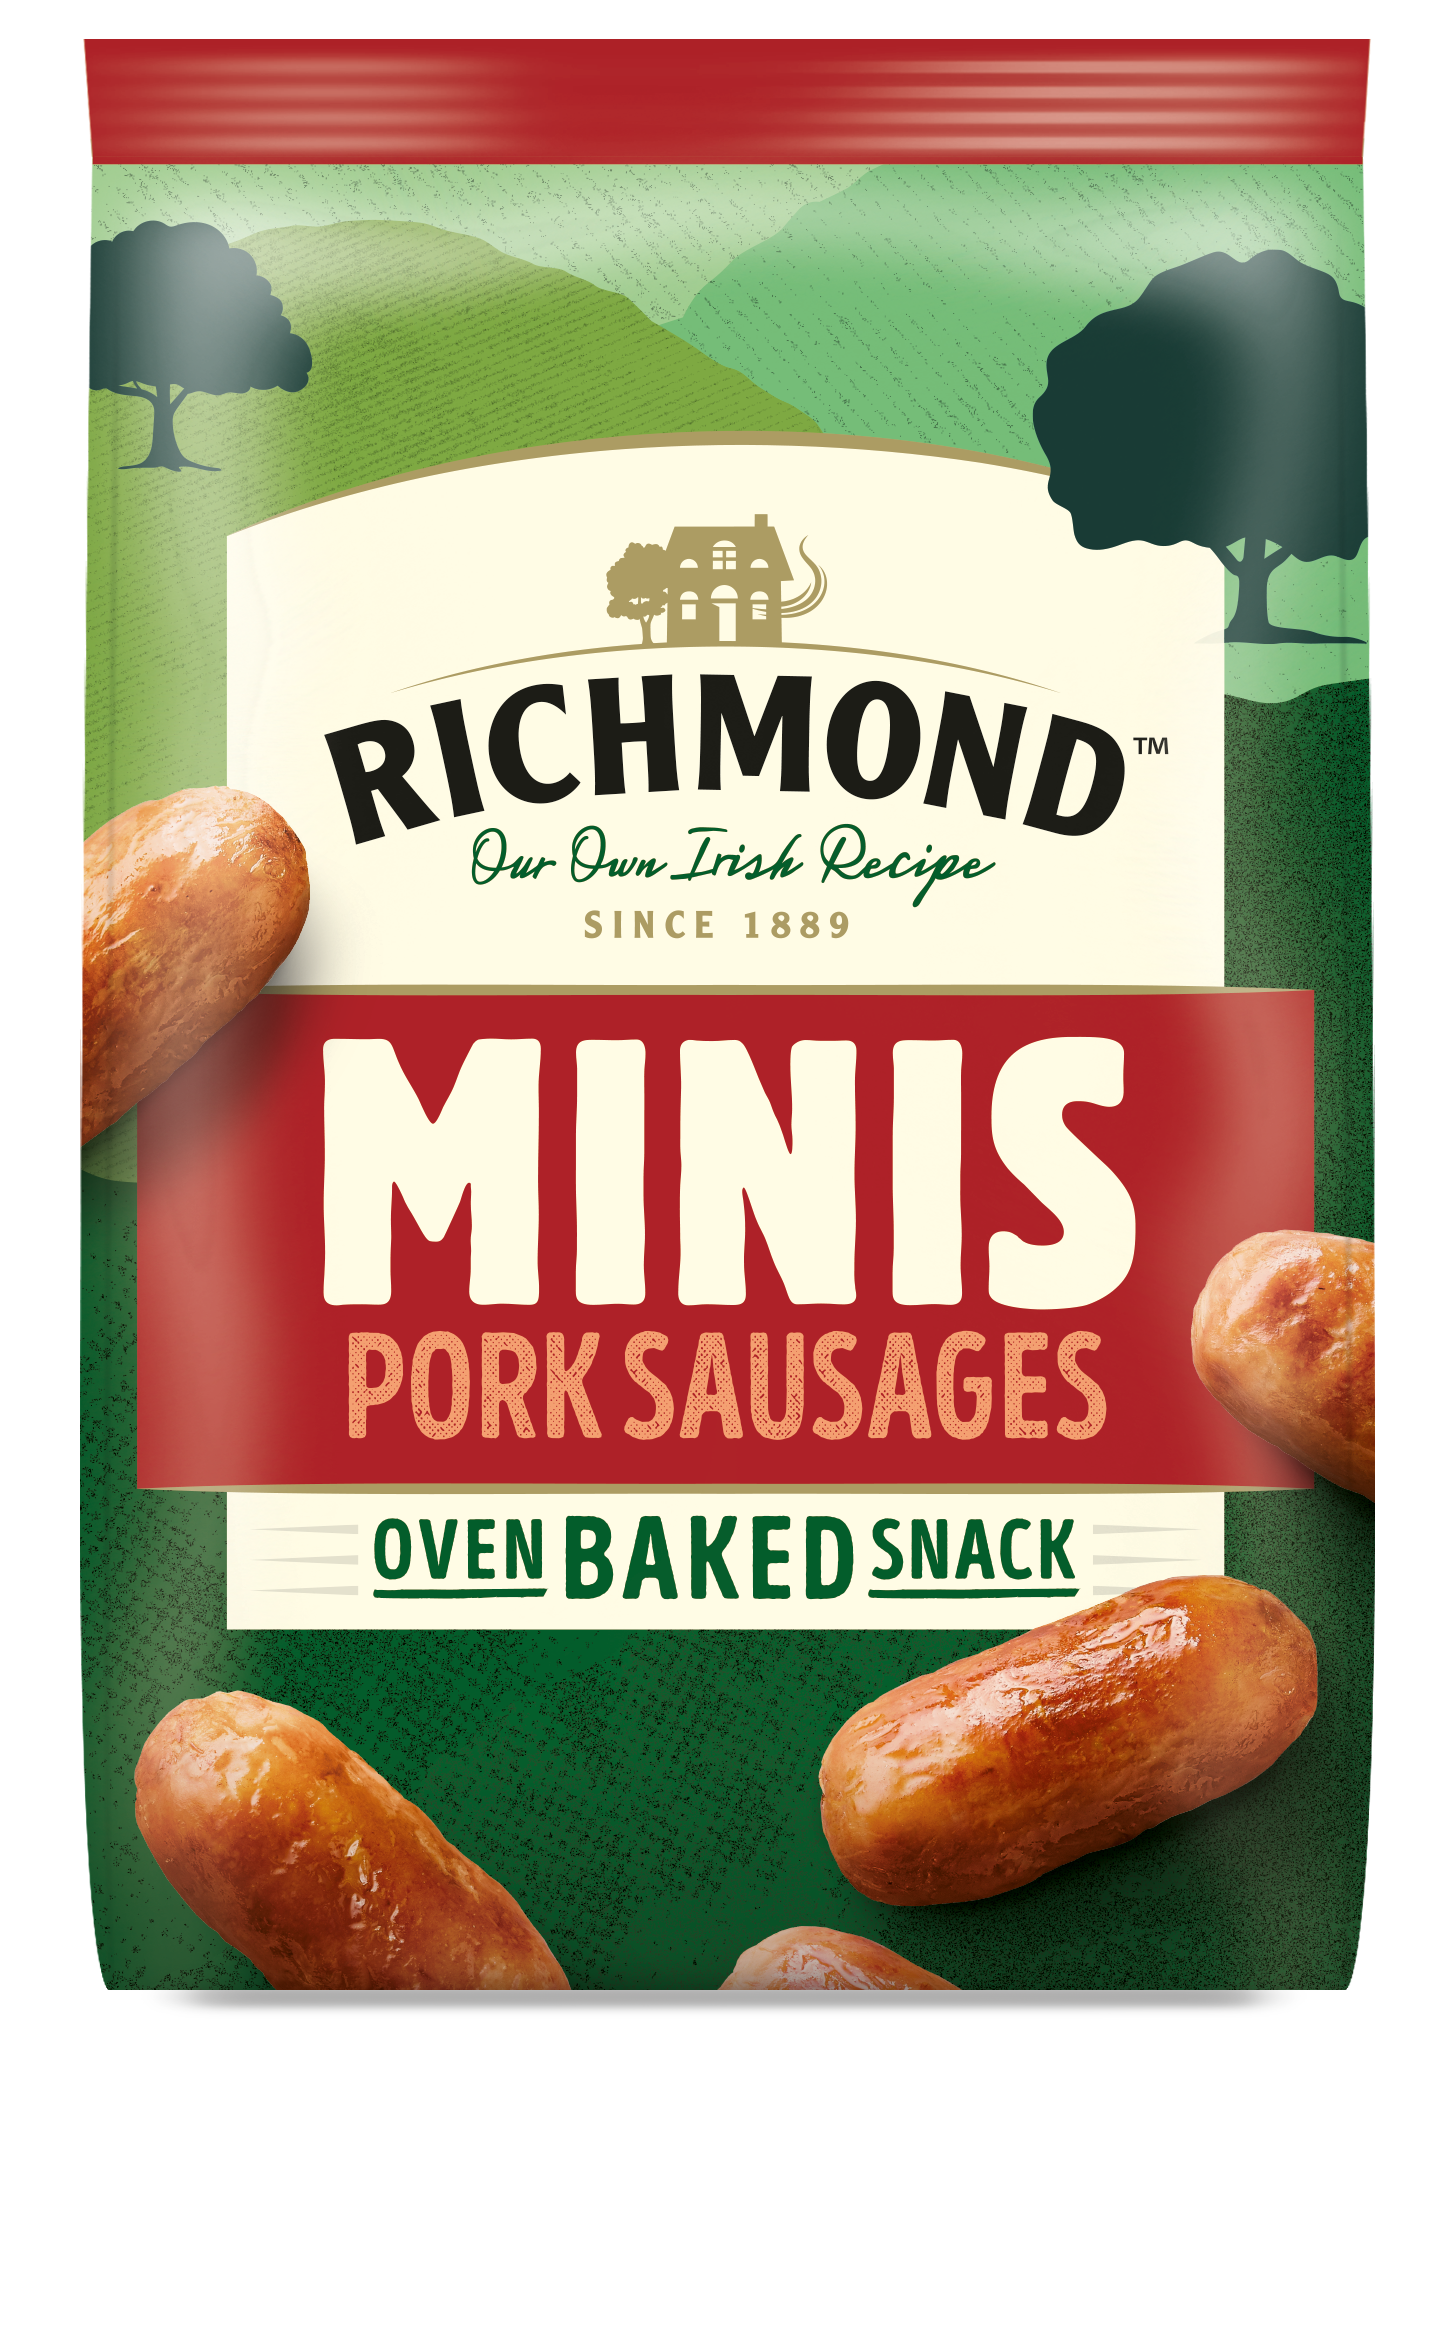 Richmond debuts in the snacking category with Richmond Minis